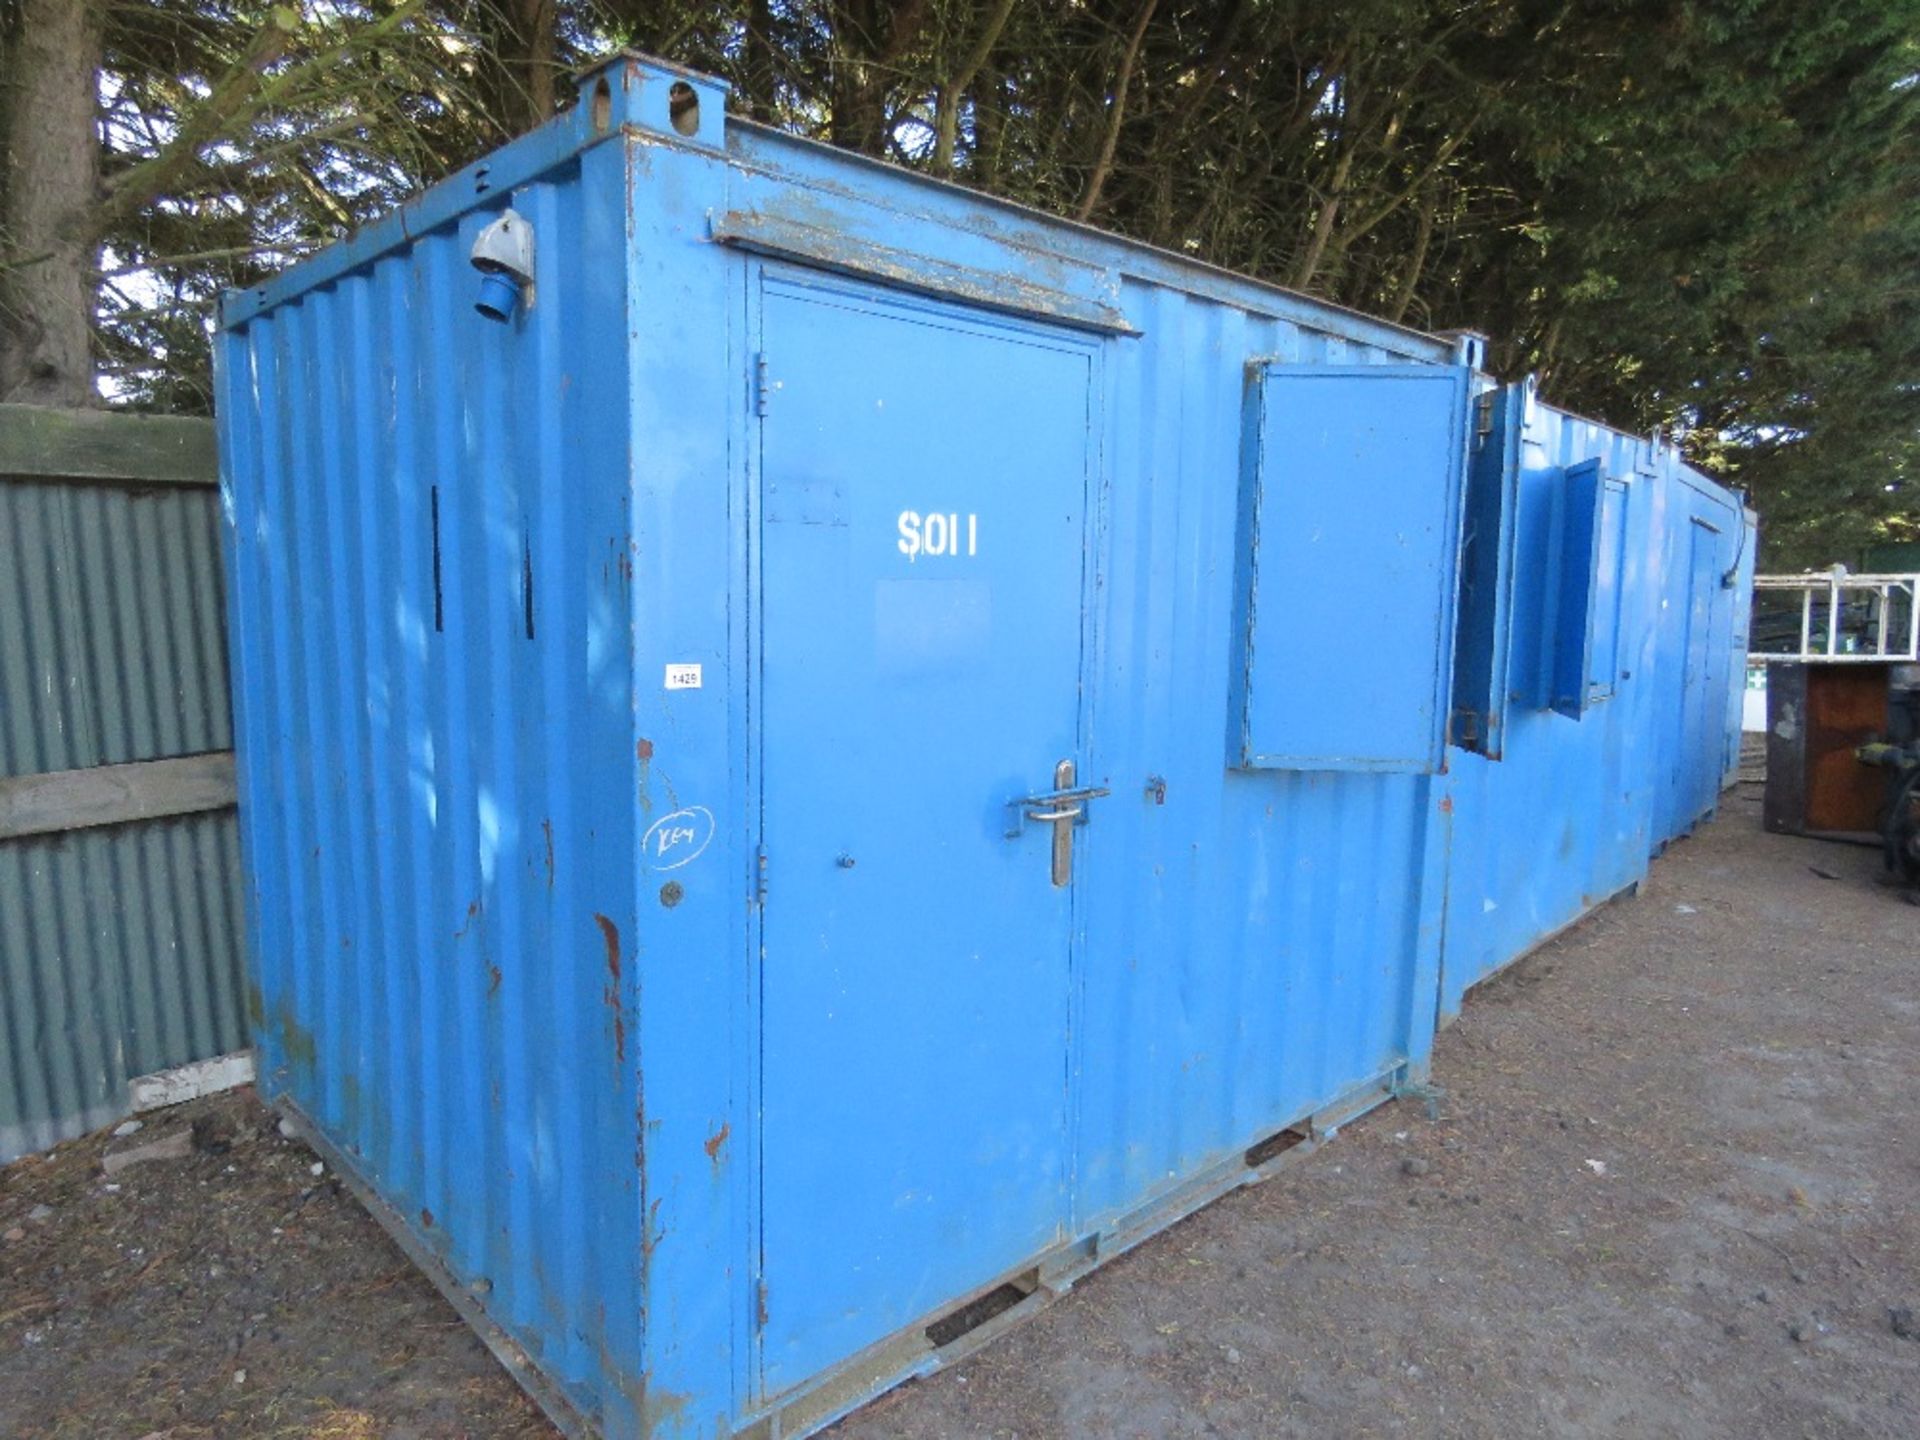 SECURE SITE OFFICE WITH KEY. 10FT X 8FT APPROX. SO11.